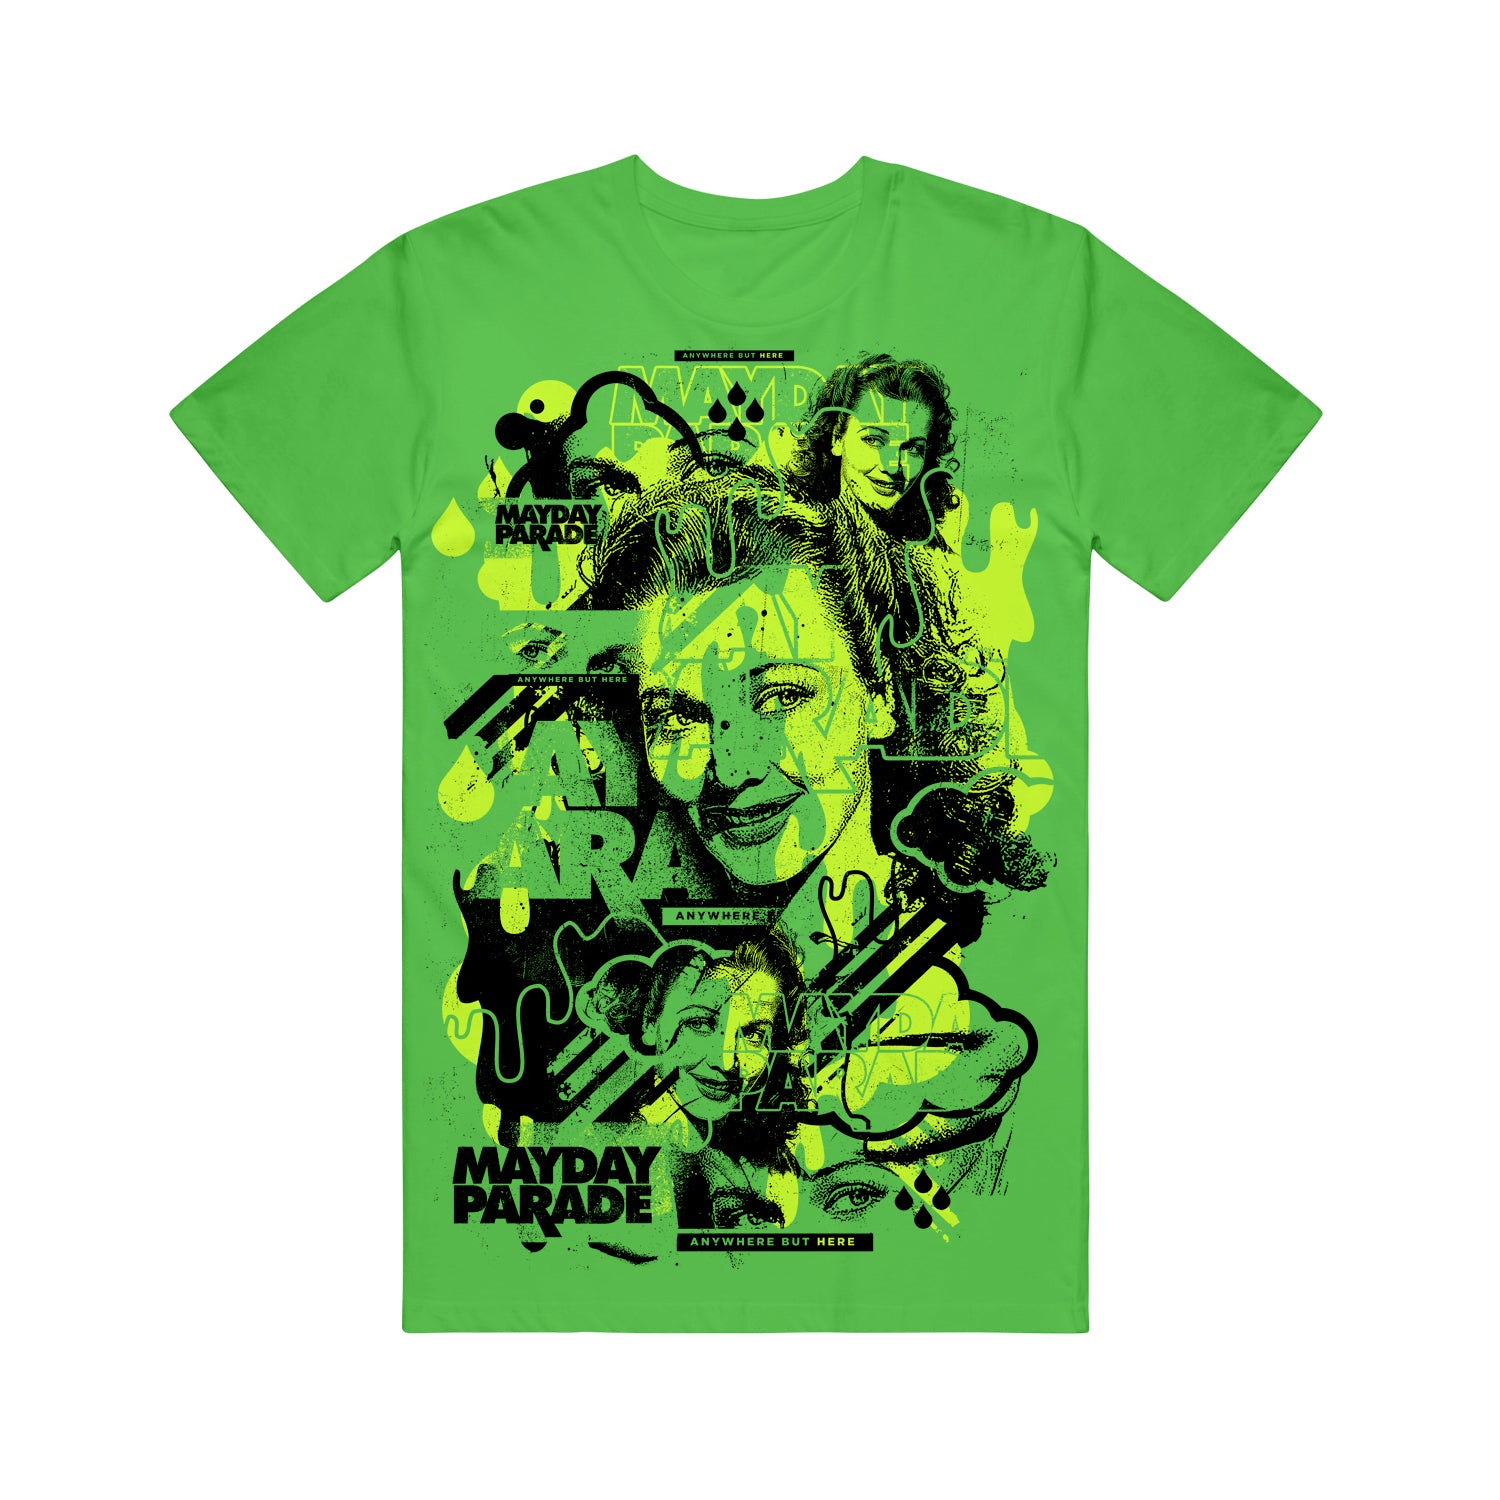 image of a green tee shirt on a white background. tee has a full chest print in black of a woman's face three times. once at the top right, a large face in the center and another at the bottom left. mayday parade is written throughout completing the collage like design